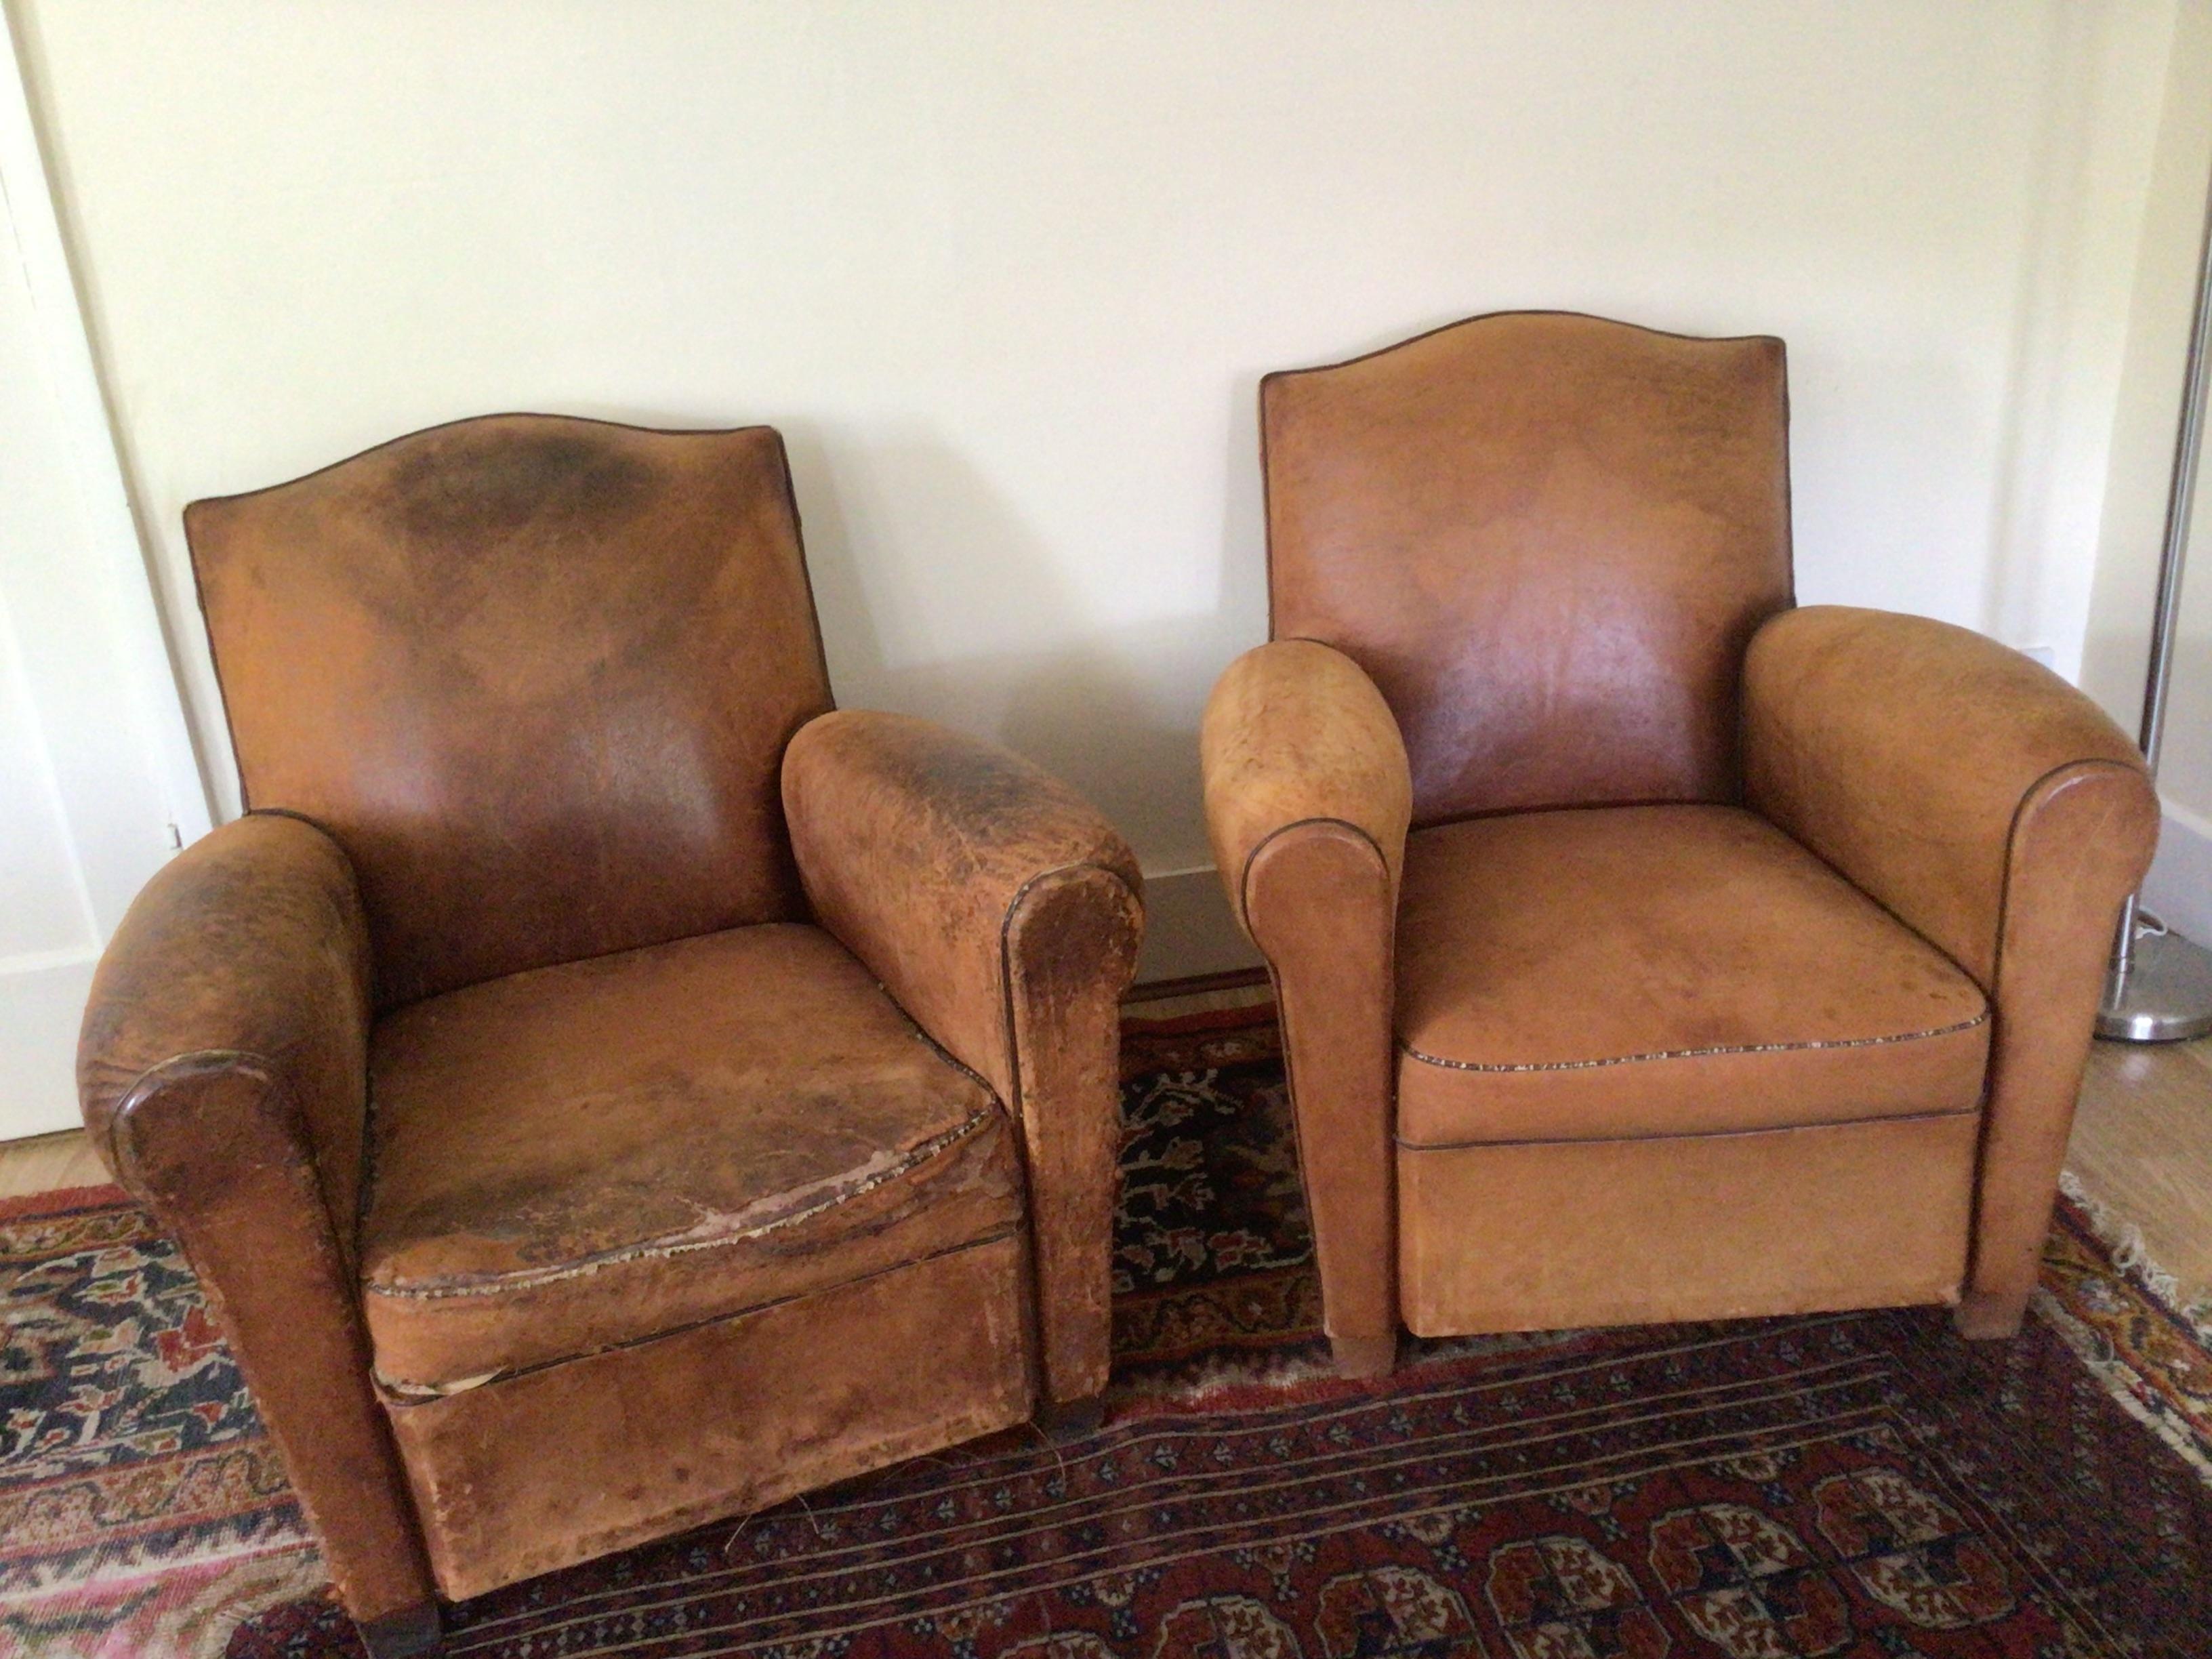 A matching pair of French, art deco leather club armchairs, they are identical in shape and size, the only difference being that one is more caramel coloured than the other.
These generous pair of antique leather club chairs benefit from a beautiful